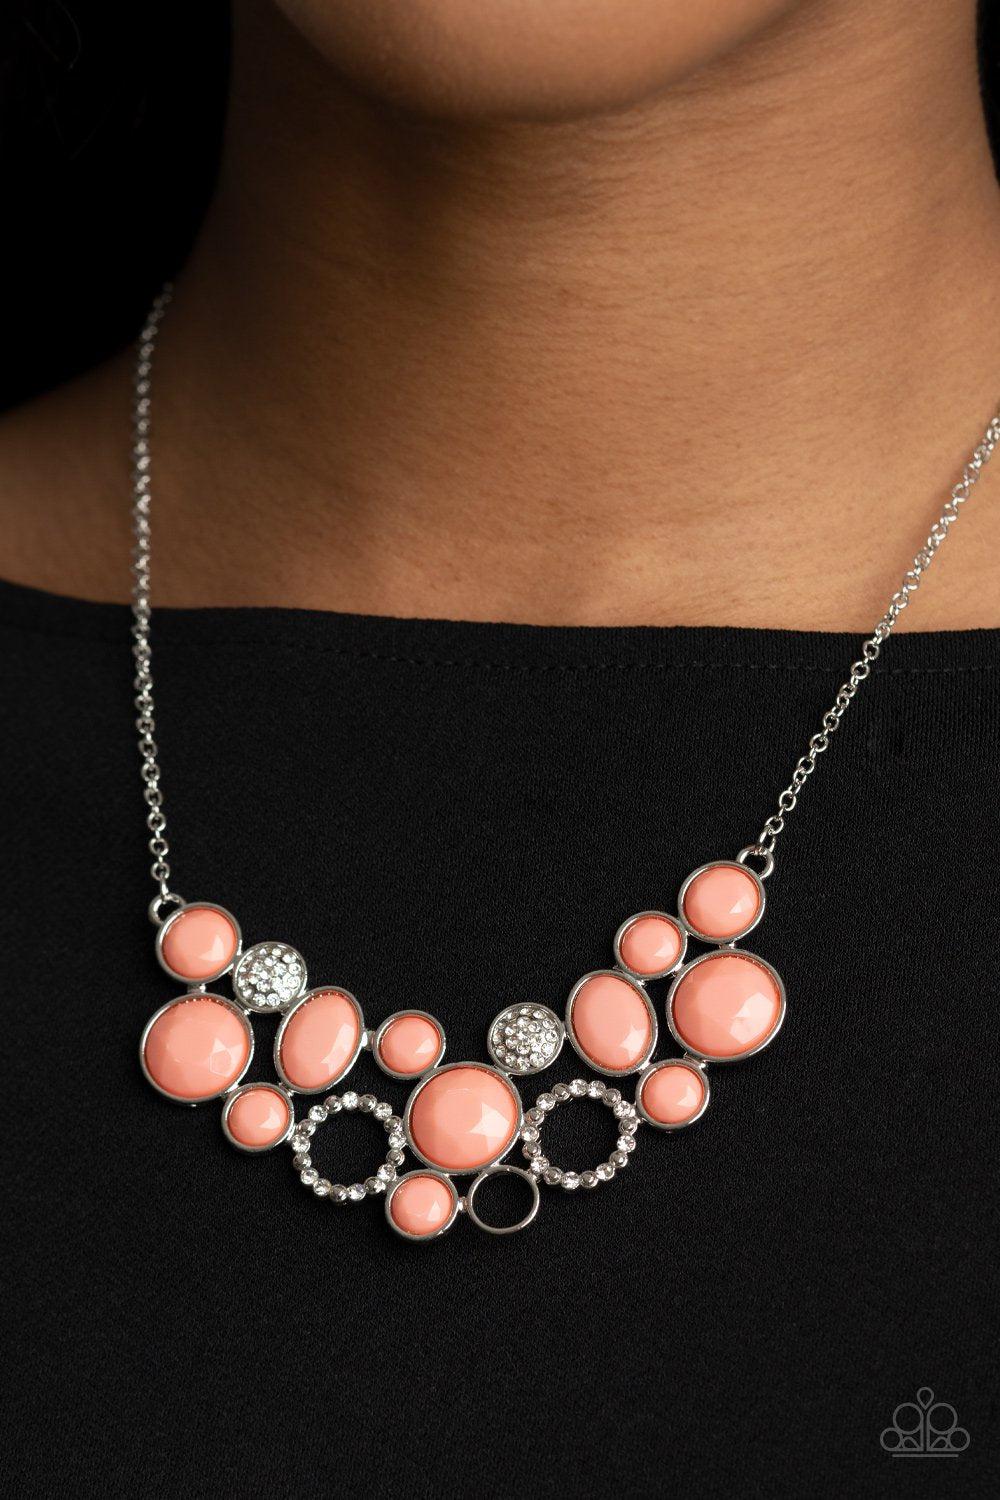 Extra Eloquent Coral and White Rhinestone Necklace - Paparazzi Accessories- model - CarasShop.com - $5 Jewelry by Cara Jewels